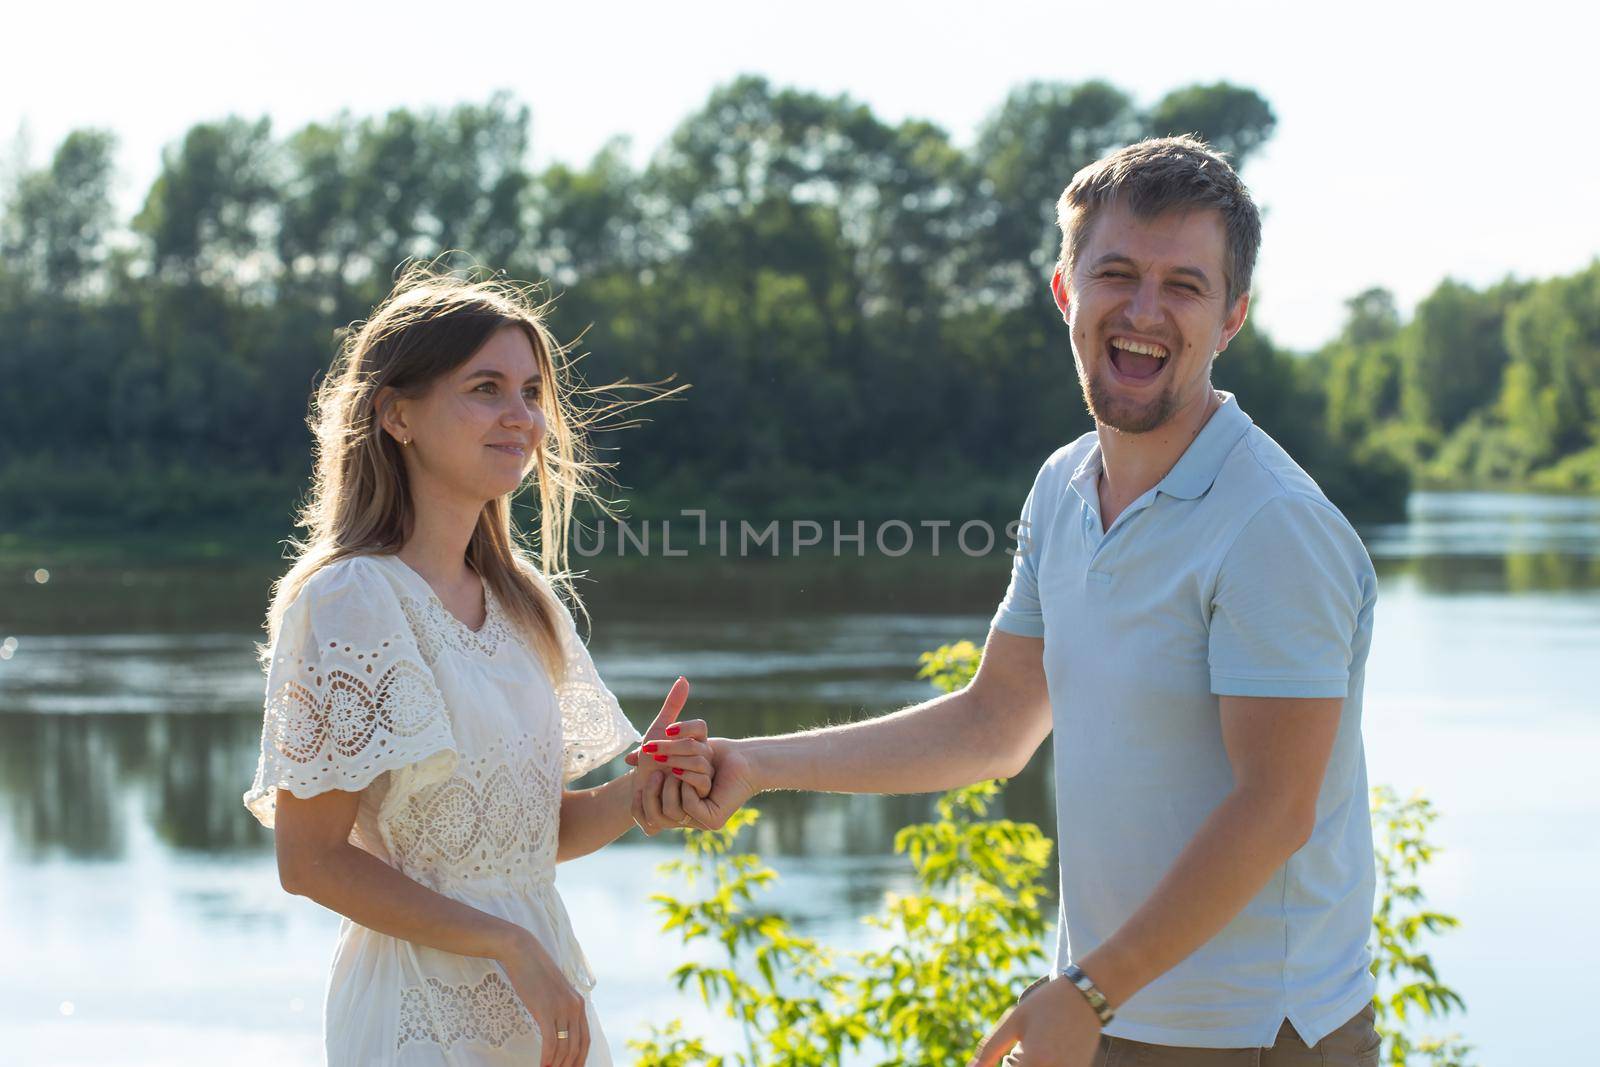 Young couple in love outdoor.Stunning sensual outdoor portrait of young stylish fashion couple posing in summer by Satura86